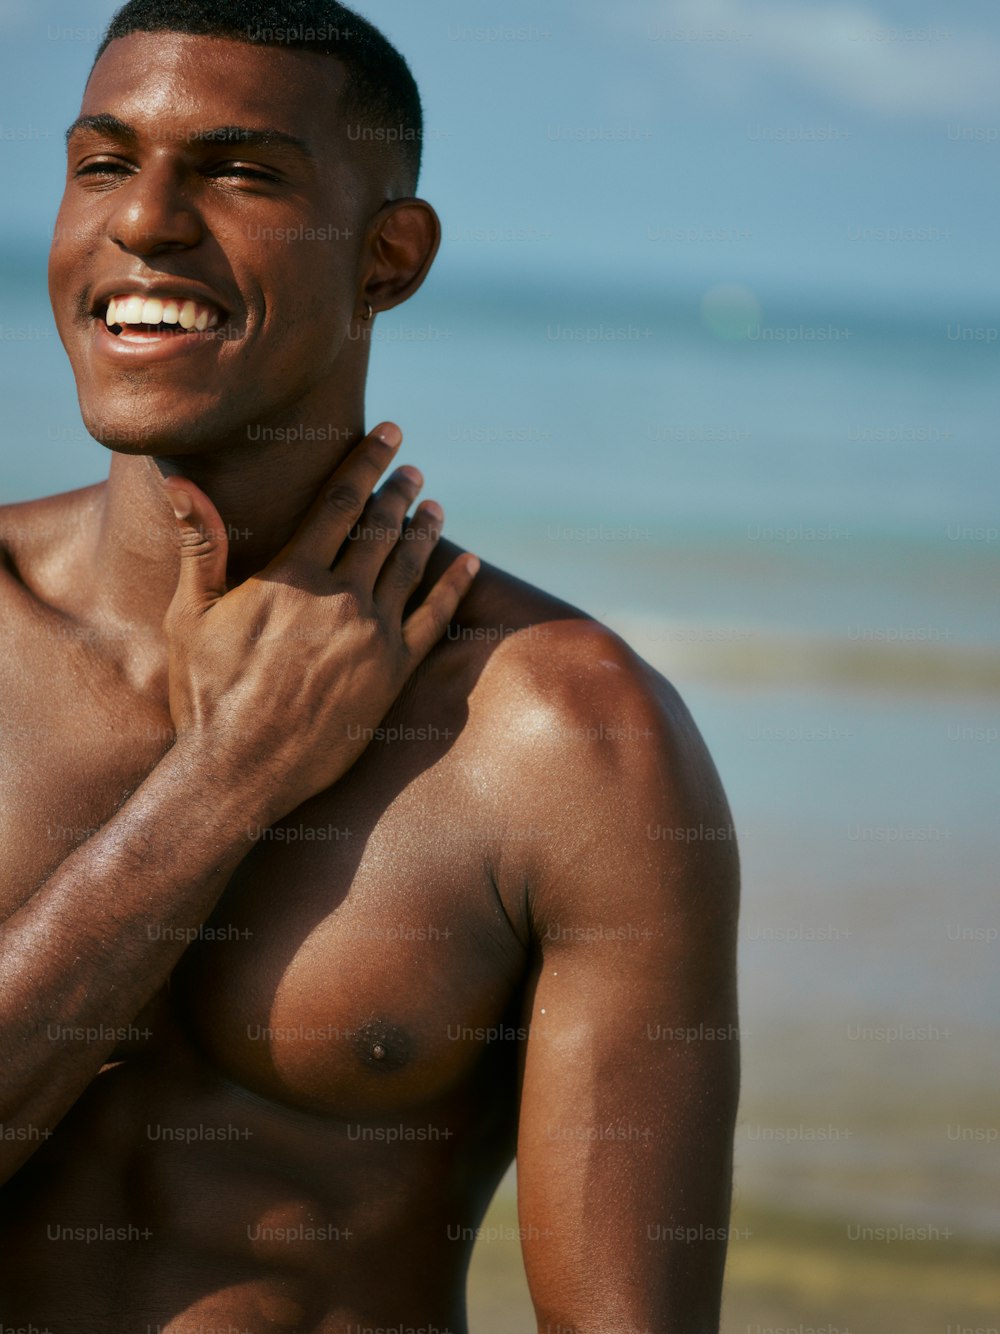 a shirtless man standing on a beach next to the ocean